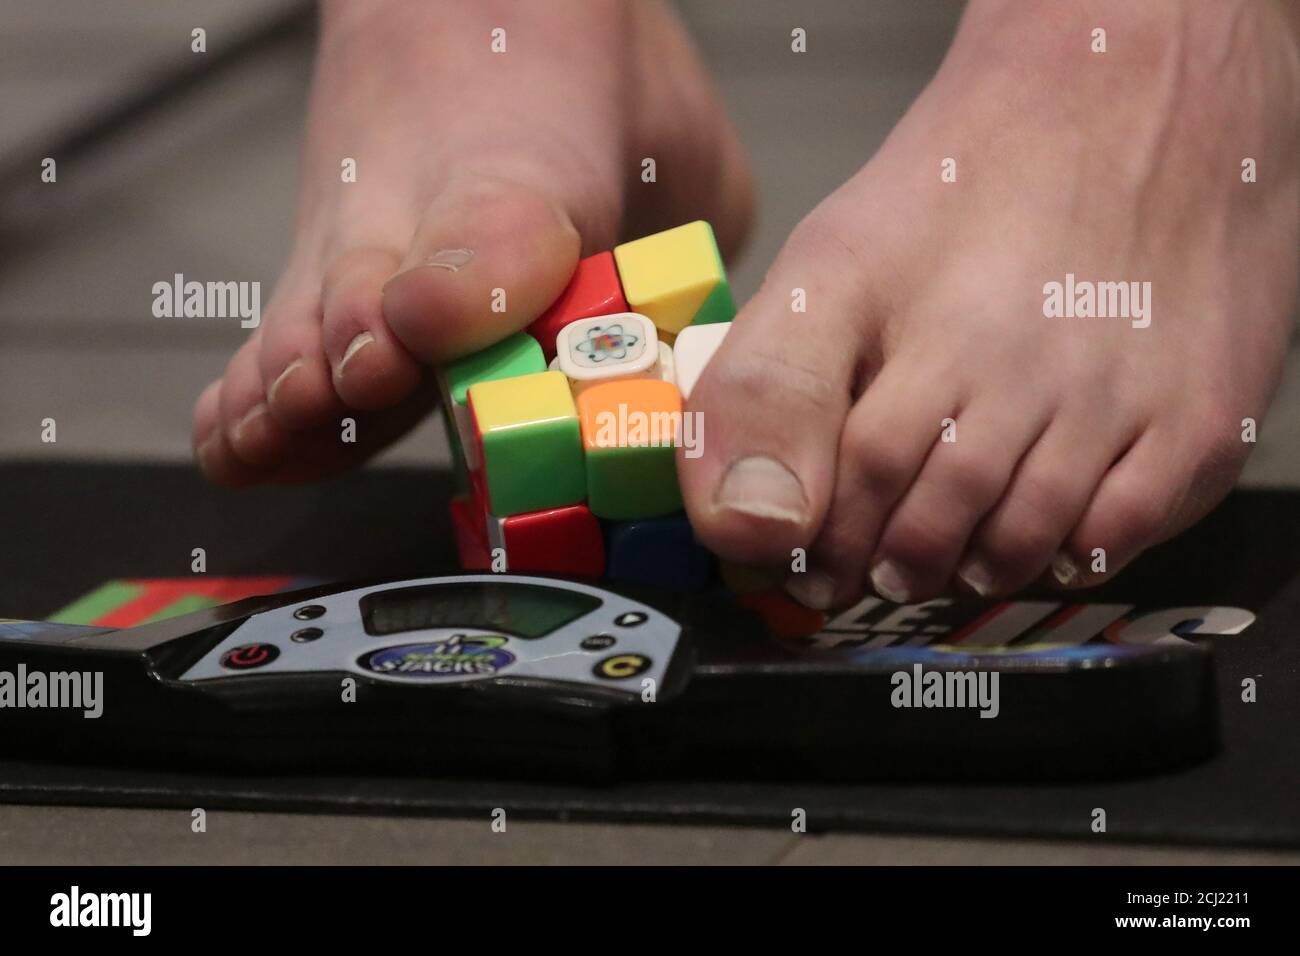 Guinness World record holder for solving a Rubik's cube with his feet Daniel  Rose-Levine practices on solving it in New York, U.S., March 11, 2019.  REUTERS/Shannon Stapleton Stock Photo - Alamy